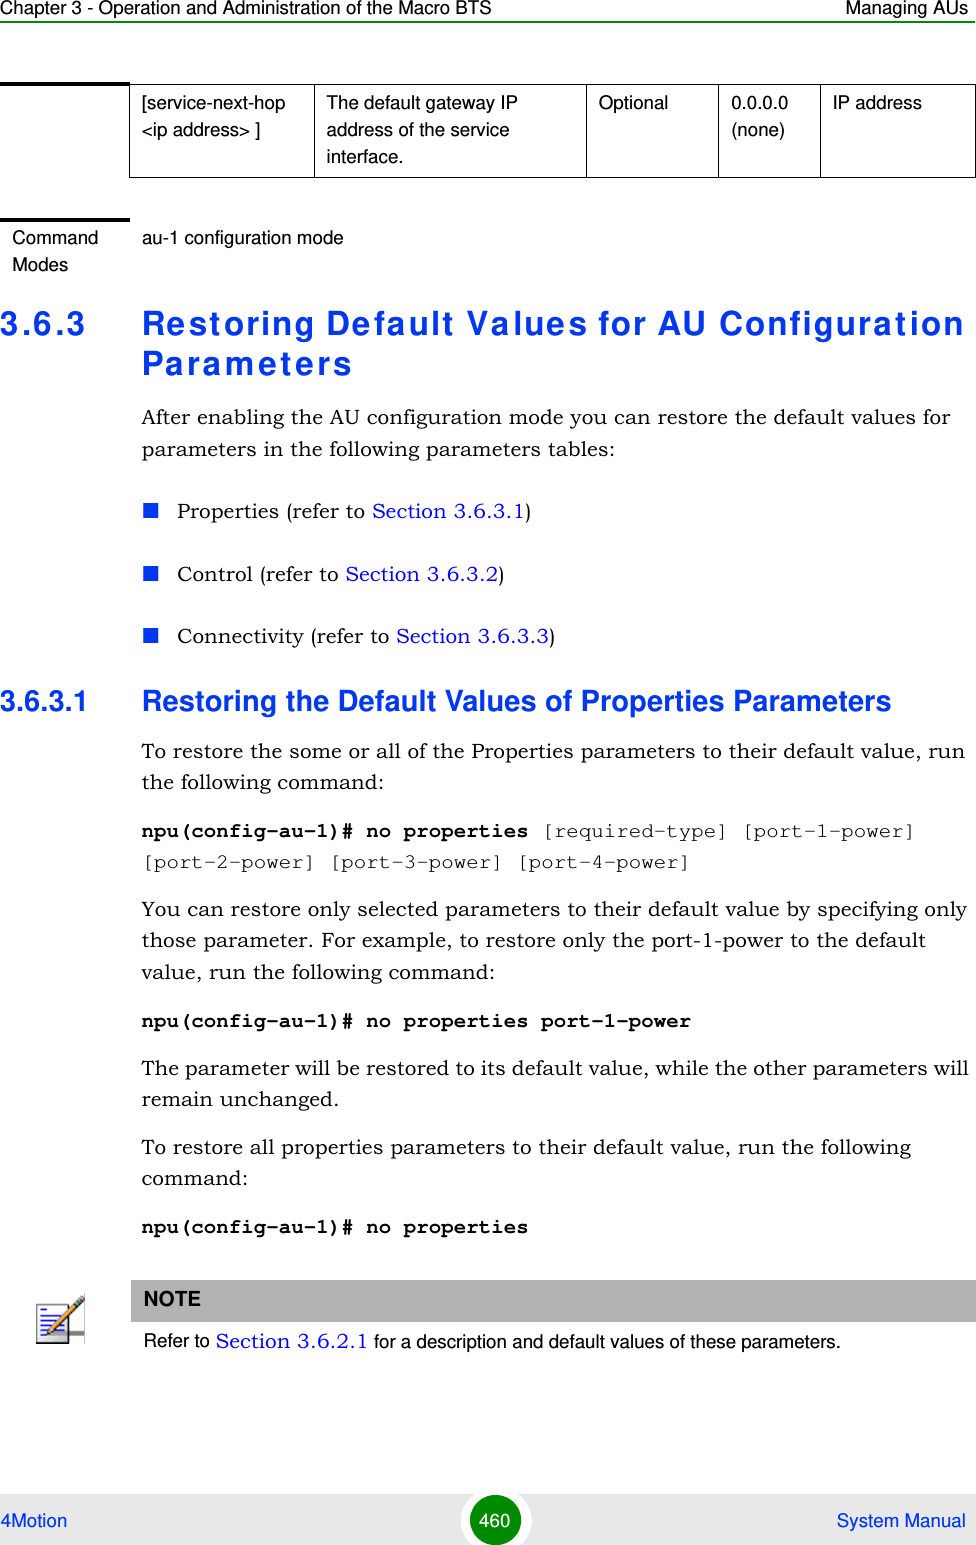 Chapter 3 - Operation and Administration of the Macro BTS Managing AUs4Motion 460  System Manual3.6 .3 Restoring Default Value s for AU Configurat ion Pa ra m e t e r sAfter enabling the AU configuration mode you can restore the default values for parameters in the following parameters tables:Properties (refer to Section 3.6.3.1)Control (refer to Section 3.6.3.2)Connectivity (refer to Section 3.6.3.3)3.6.3.1 Restoring the Default Values of Properties ParametersTo restore the some or all of the Properties parameters to their default value, run the following command:npu(config-au-1)# no properties [required-type] [port-1-power] [port-2-power] [port-3-power] [port-4-power]You can restore only selected parameters to their default value by specifying only those parameter. For example, to restore only the port-1-power to the default value, run the following command:npu(config-au-1)# no properties port-1-powerThe parameter will be restored to its default value, while the other parameters will remain unchanged.To restore all properties parameters to their default value, run the following command:npu(config-au-1)# no properties[service-next-hop &lt;ip address&gt; ]The default gateway IP address of the service interface.Optional 0.0.0.0 (none)IP addressCommand Modesau-1 configuration modeNOTERefer to Section 3.6.2.1 for a description and default values of these parameters.